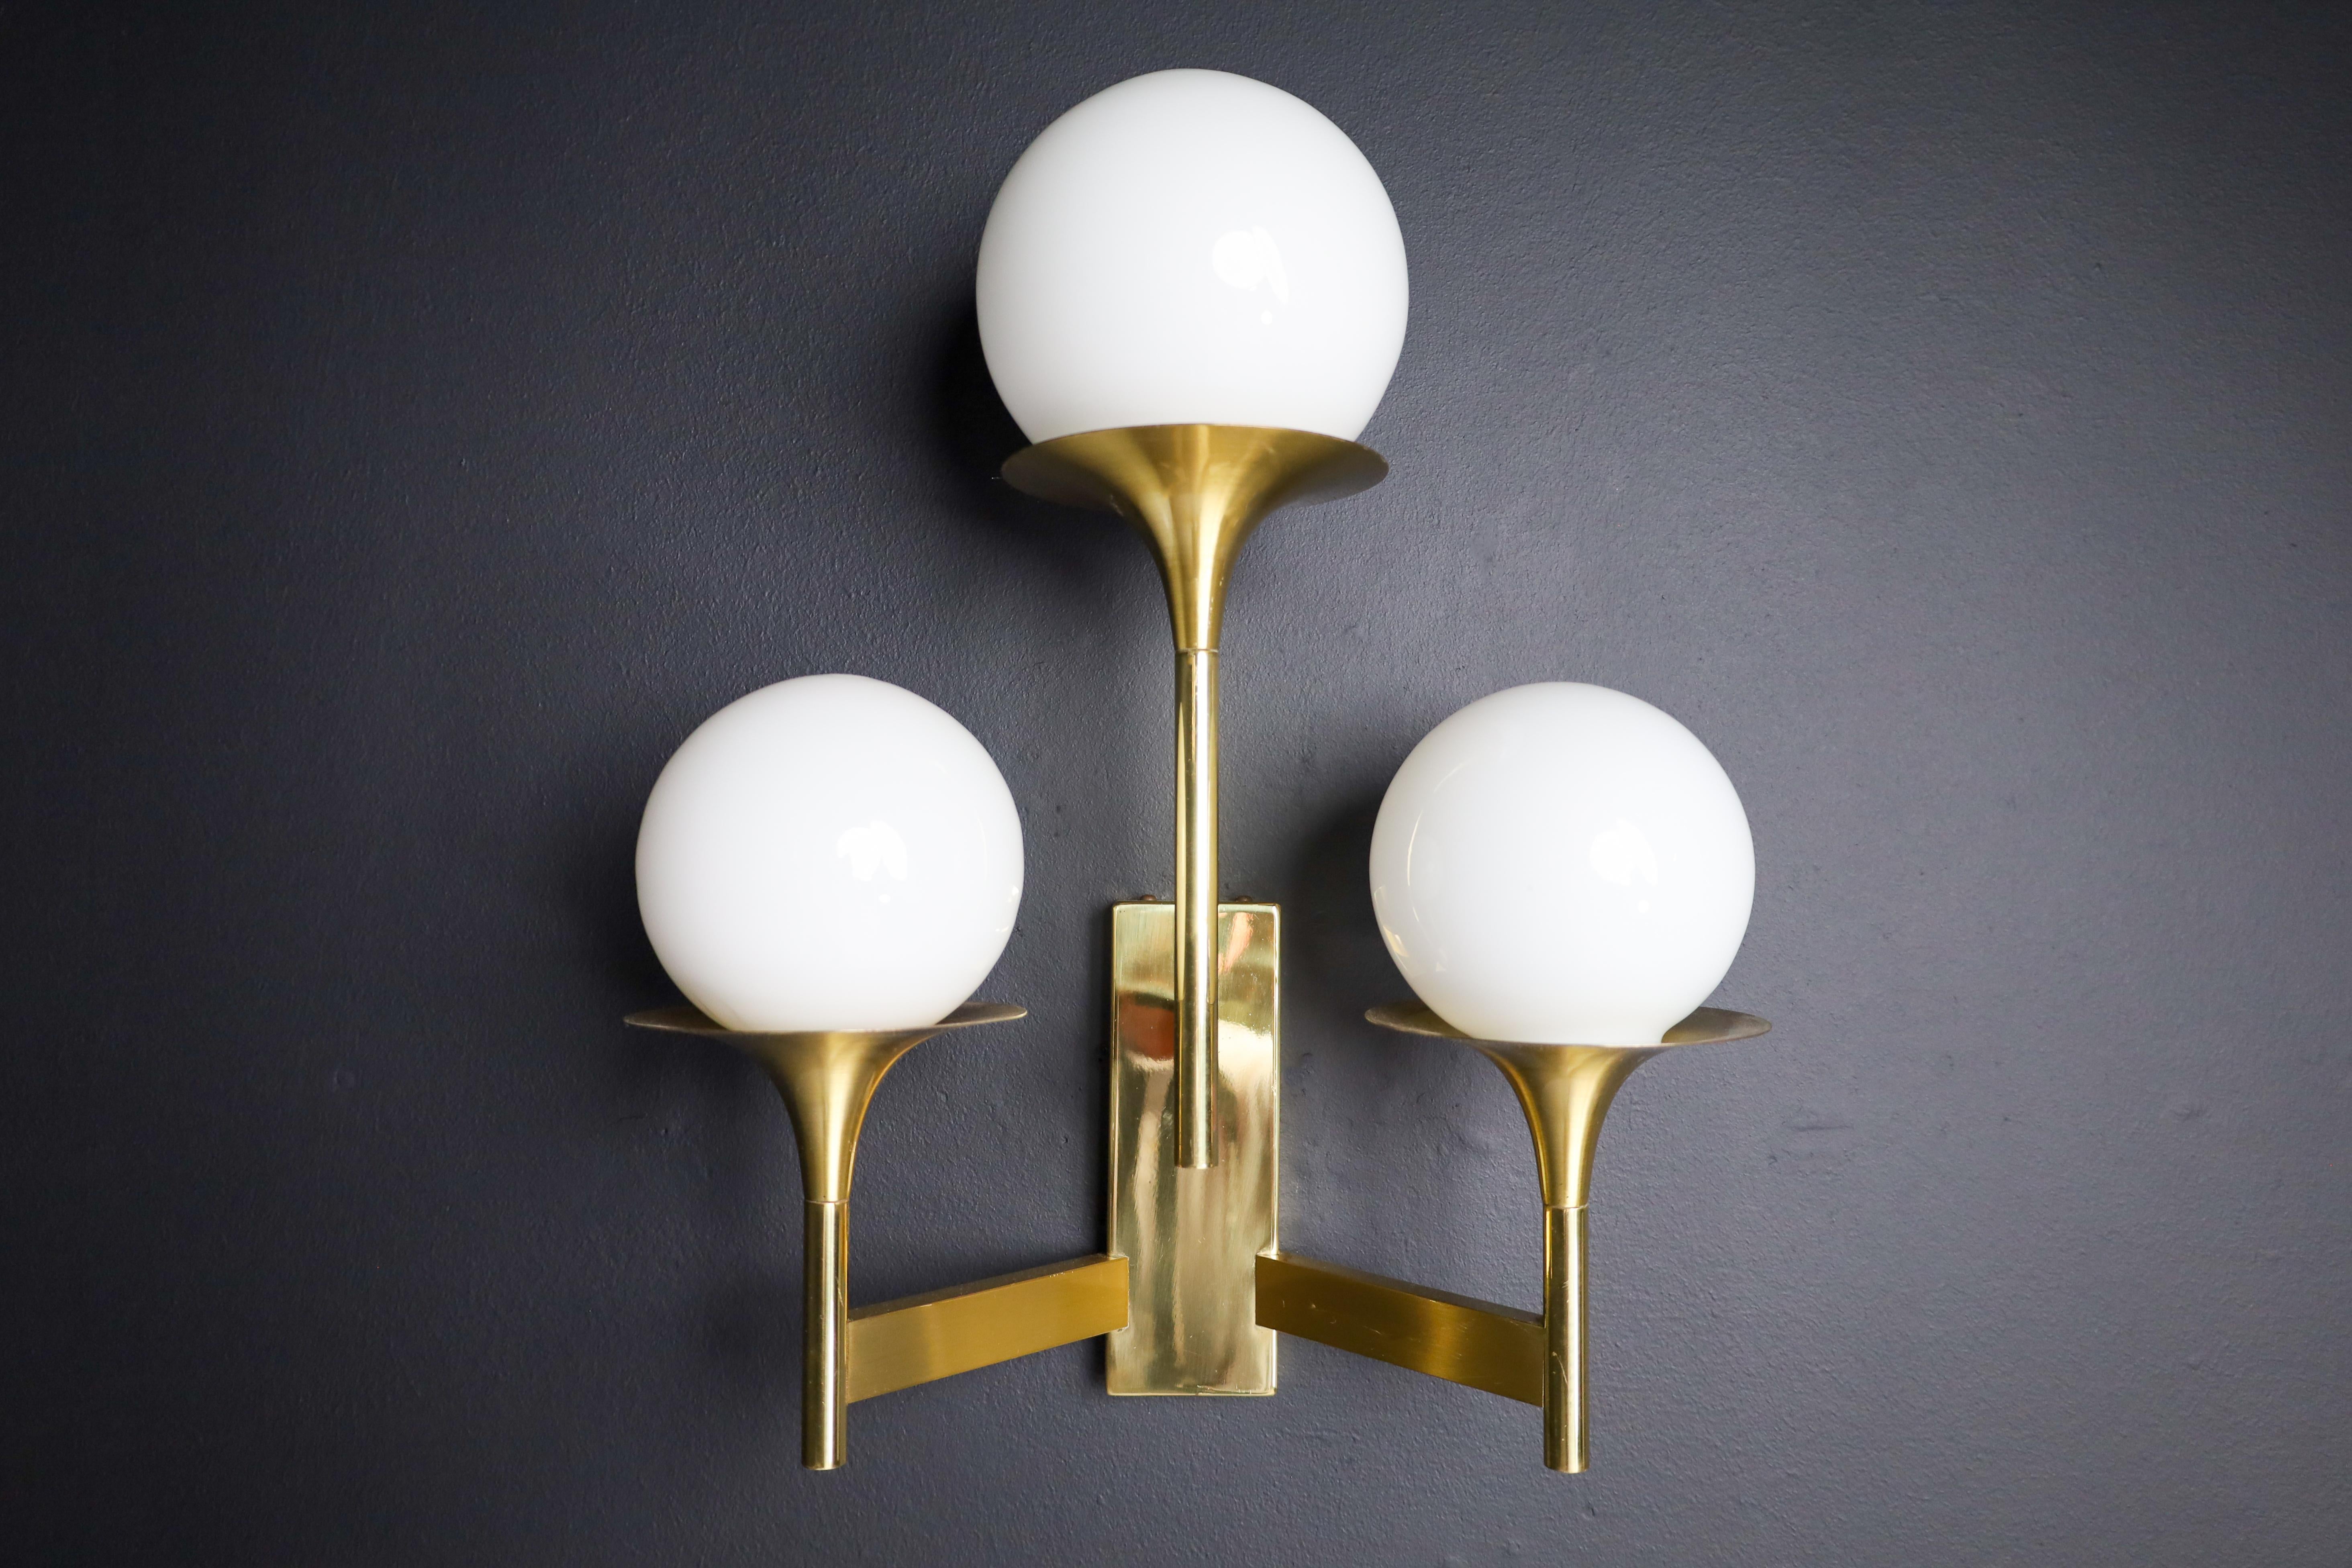 Gaetano Sciolari Sculptural Brass Wall Sconces with Opaline Glass Shades, Italy 1970s

These sculptural wall sconces designed by Gaetano Sciolari in Italy in the 70s were made in polished brass and glass shades made of double-layered opaline glass